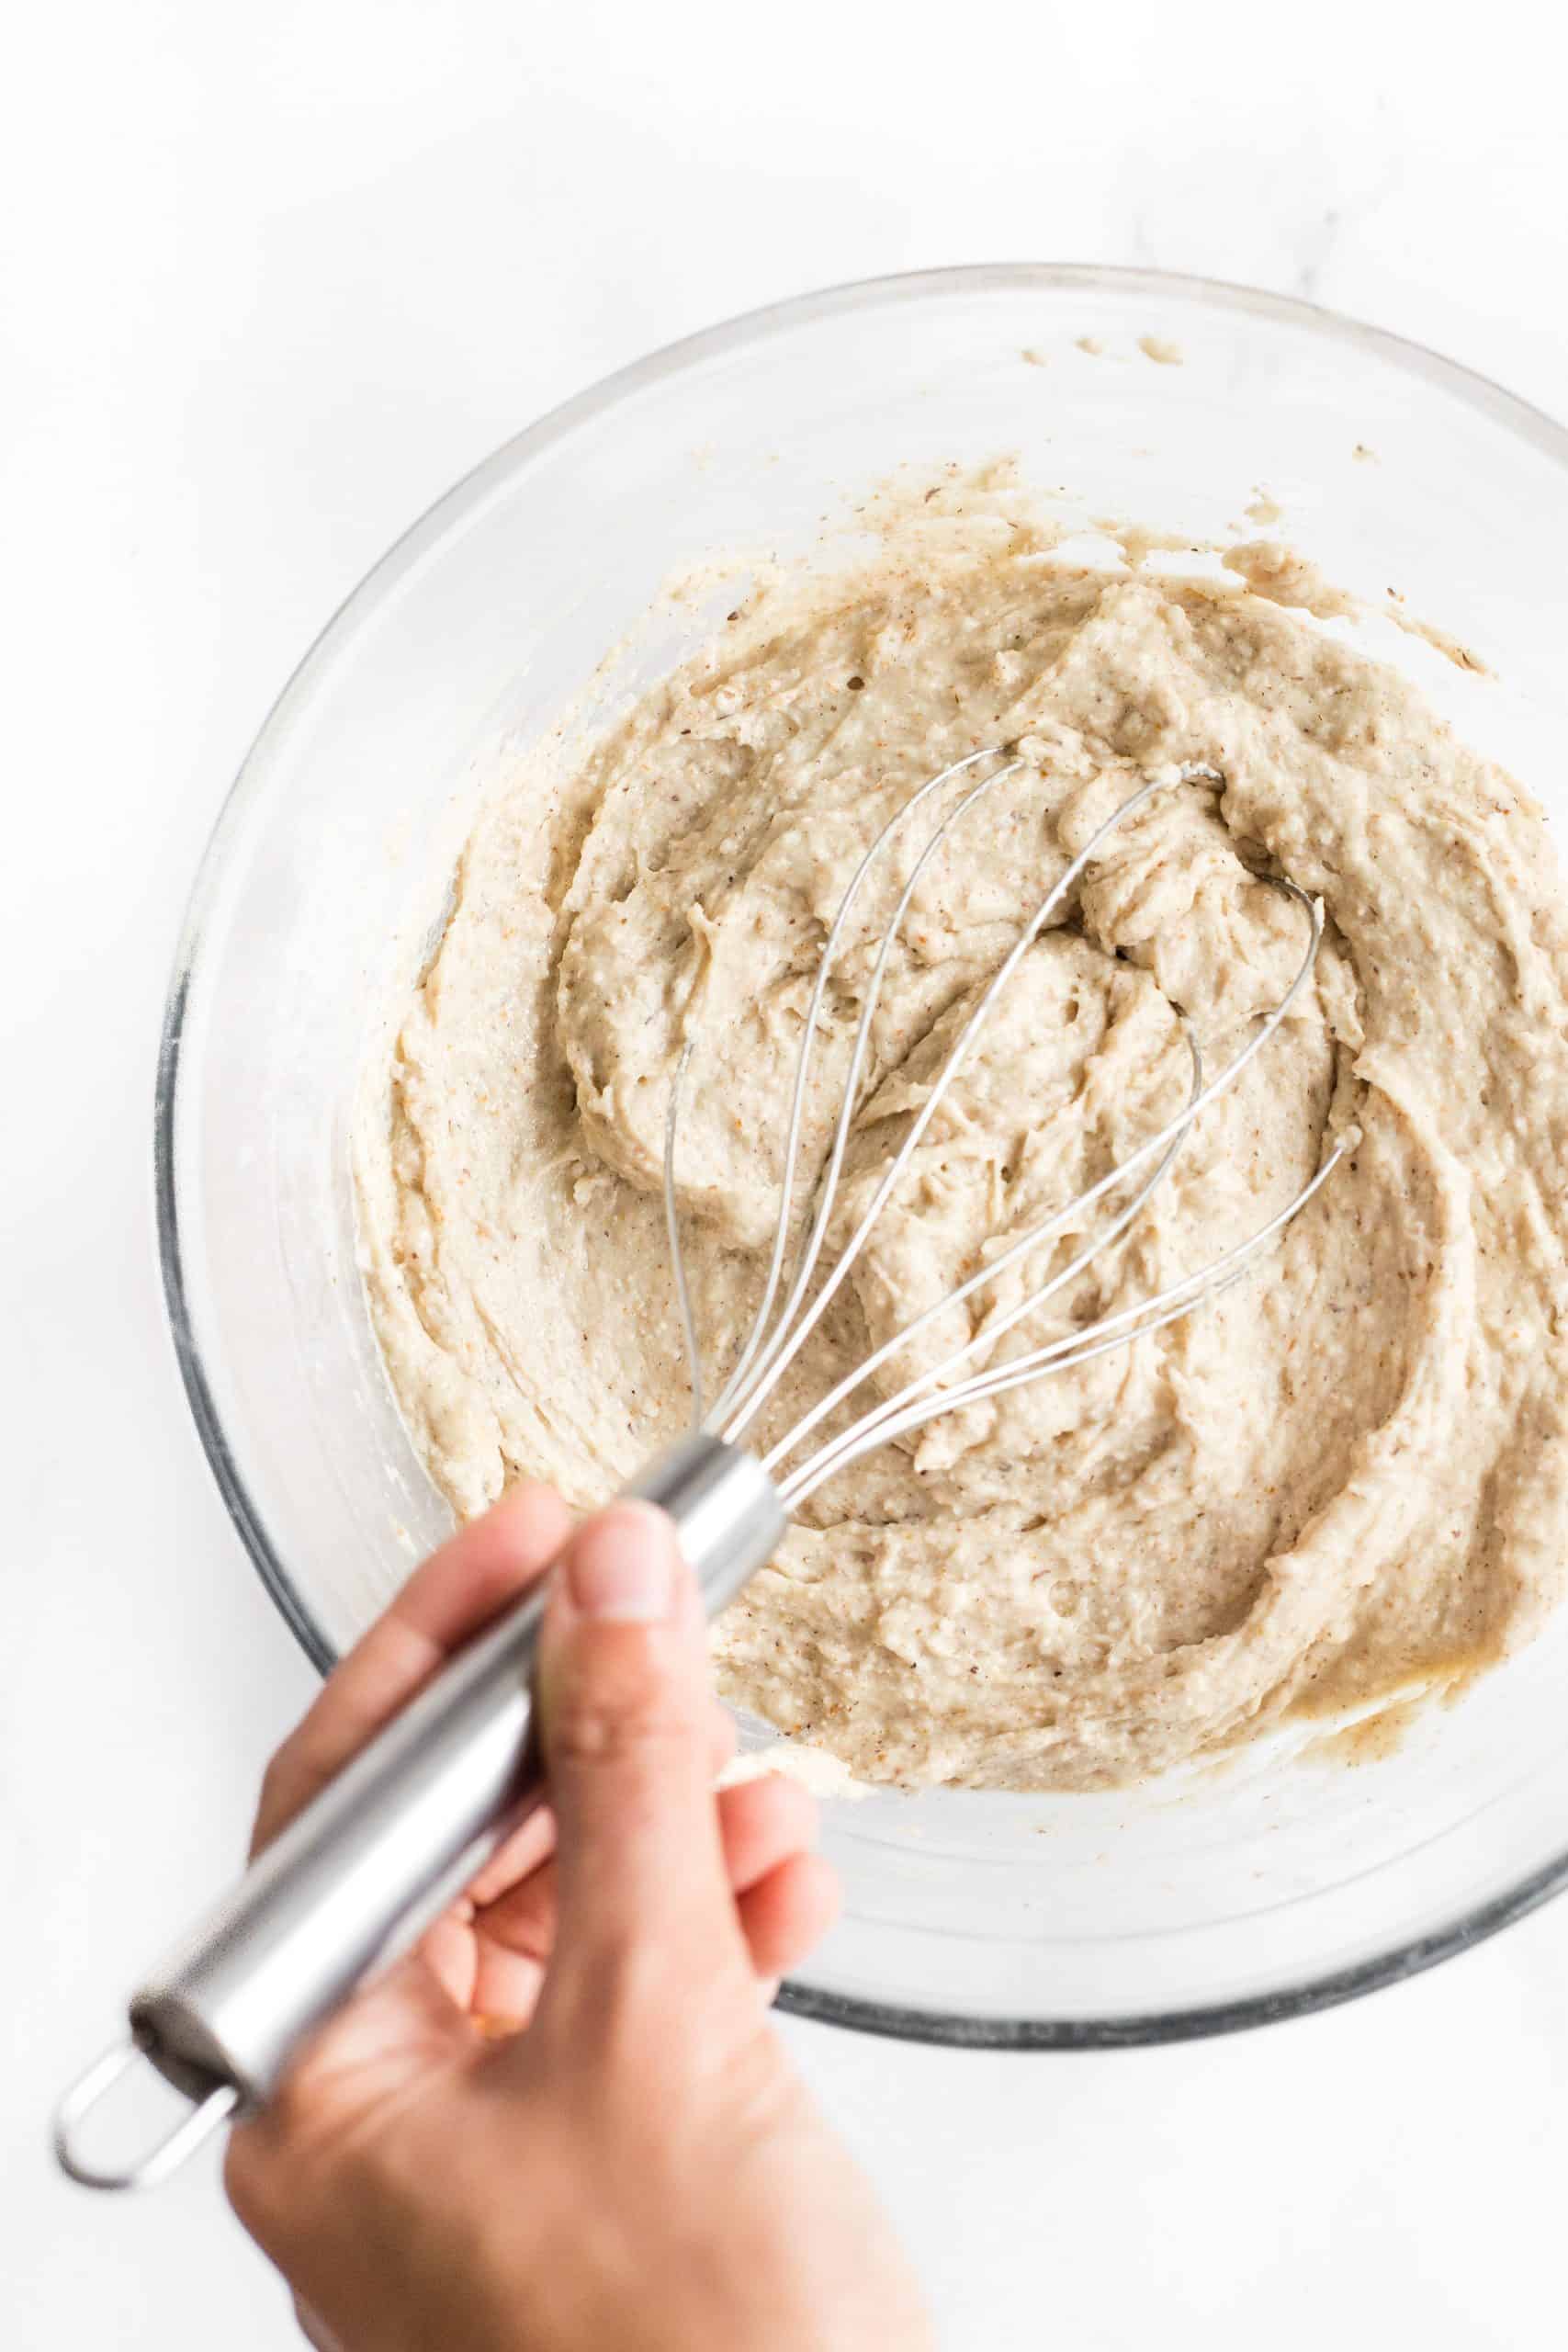 Mixing bread dough in a glass bowl.